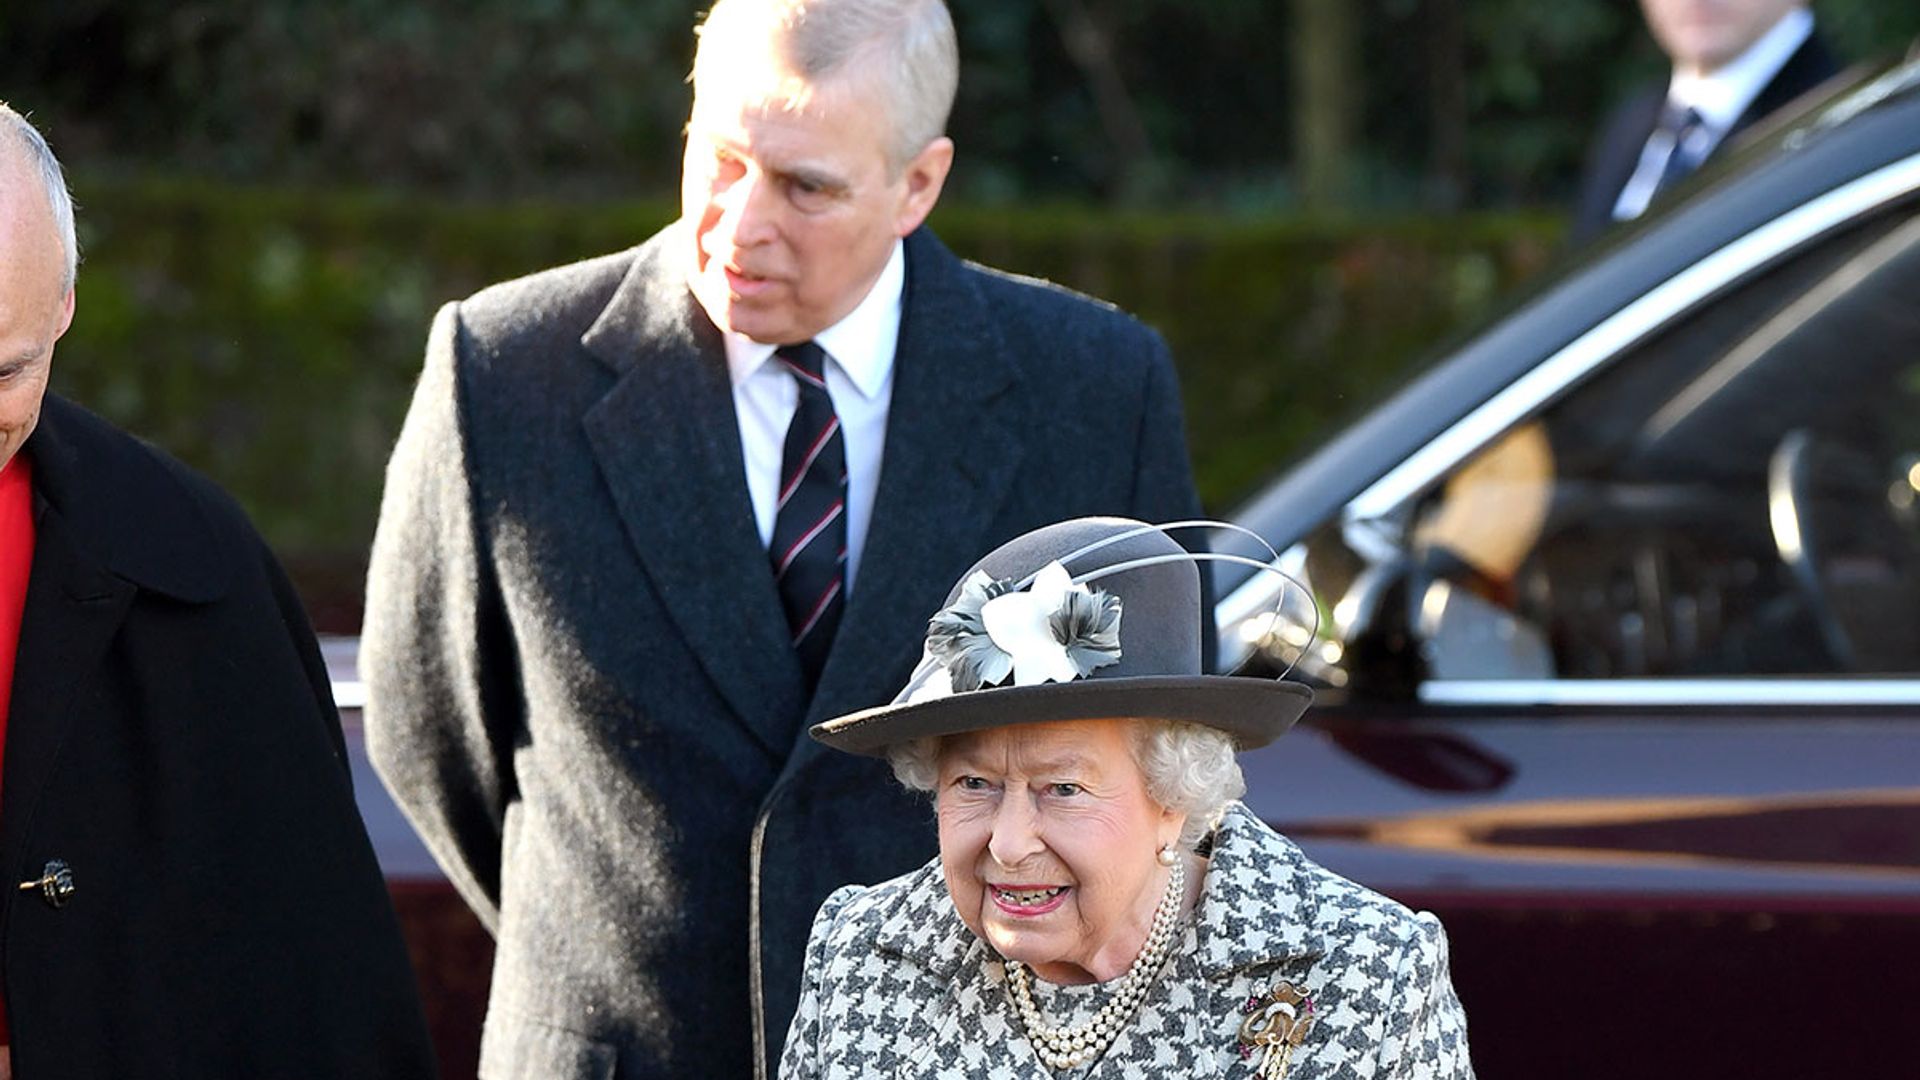 The Queen travels with Prince Andrew to Prince Philip's memorial service